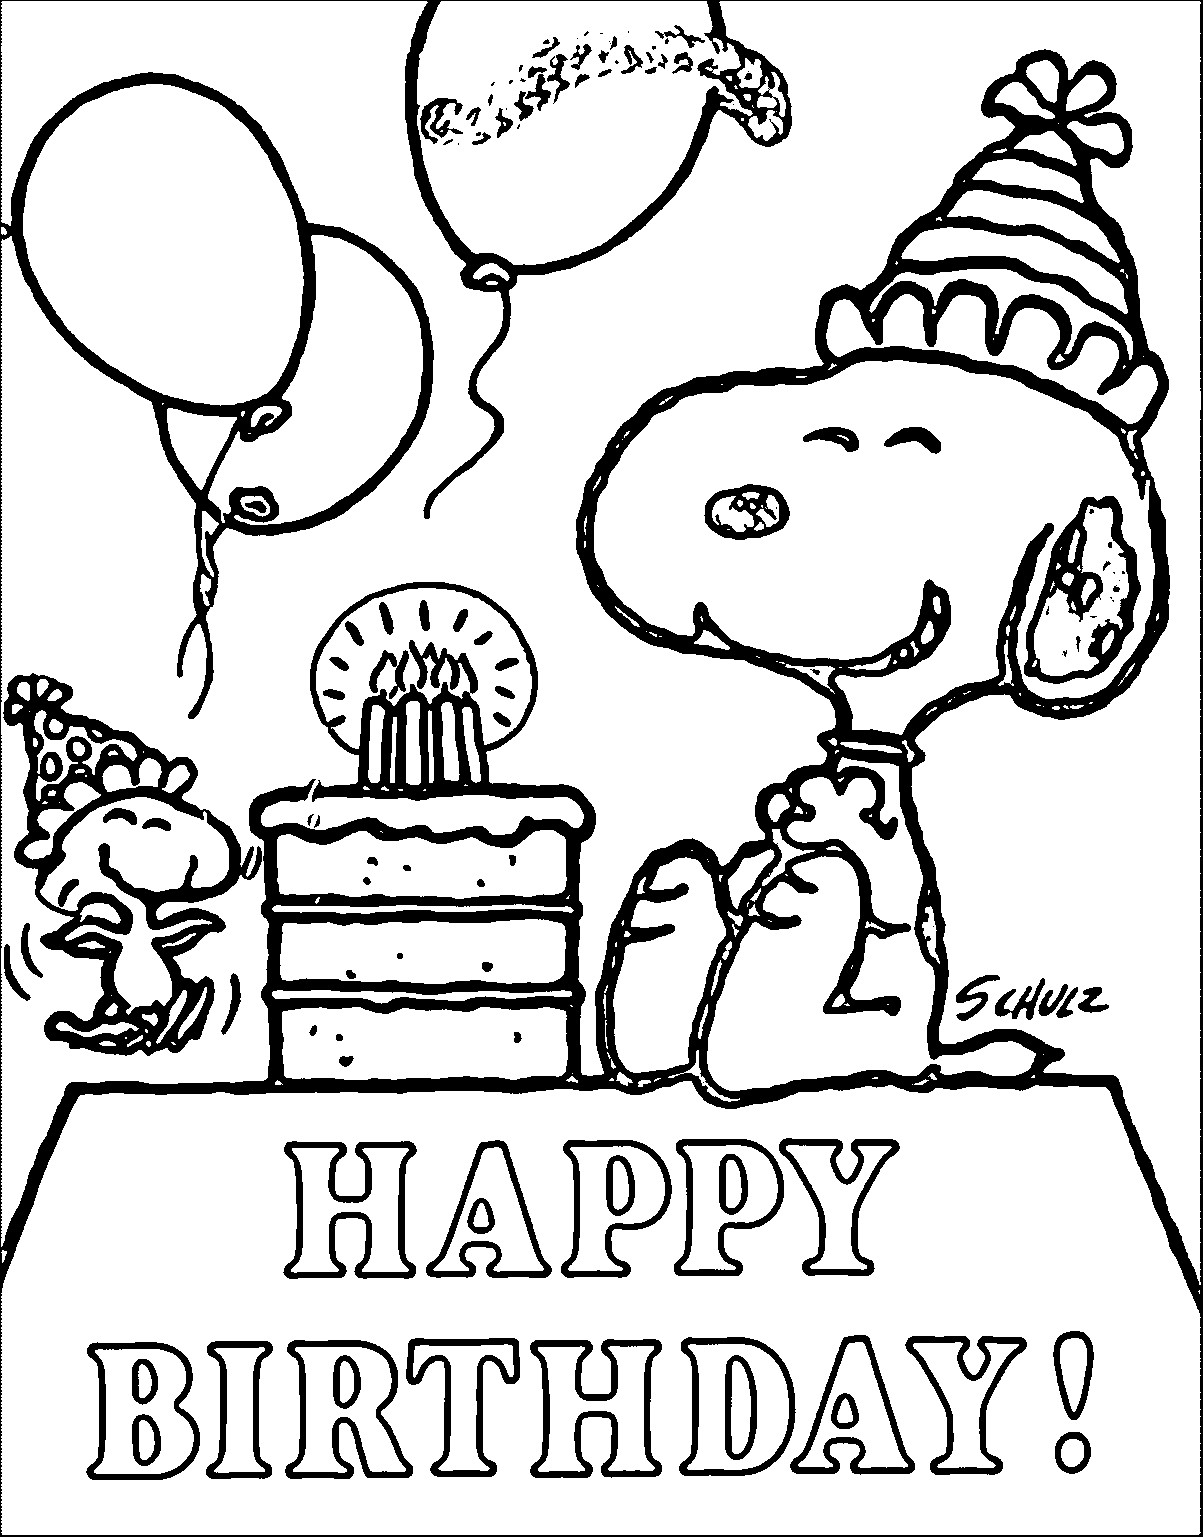 Happy Birthday Coloring Pages For Boys
 Snoopy Happy Birthday Quote Coloring Page